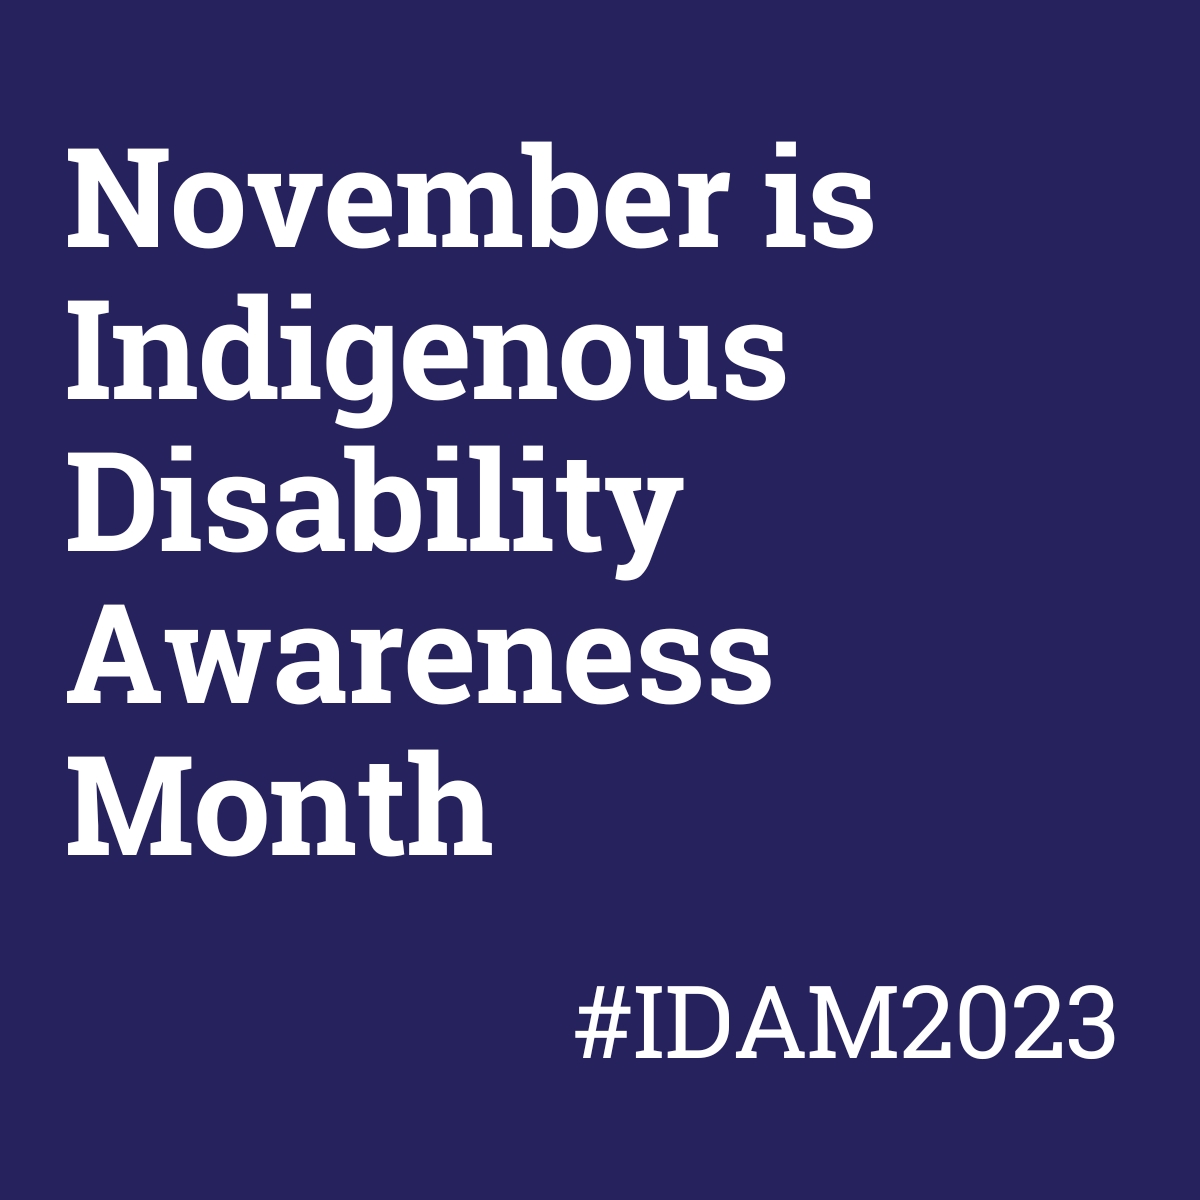 Text: November is Indigenous Disability Awareness Month #IDAM2023